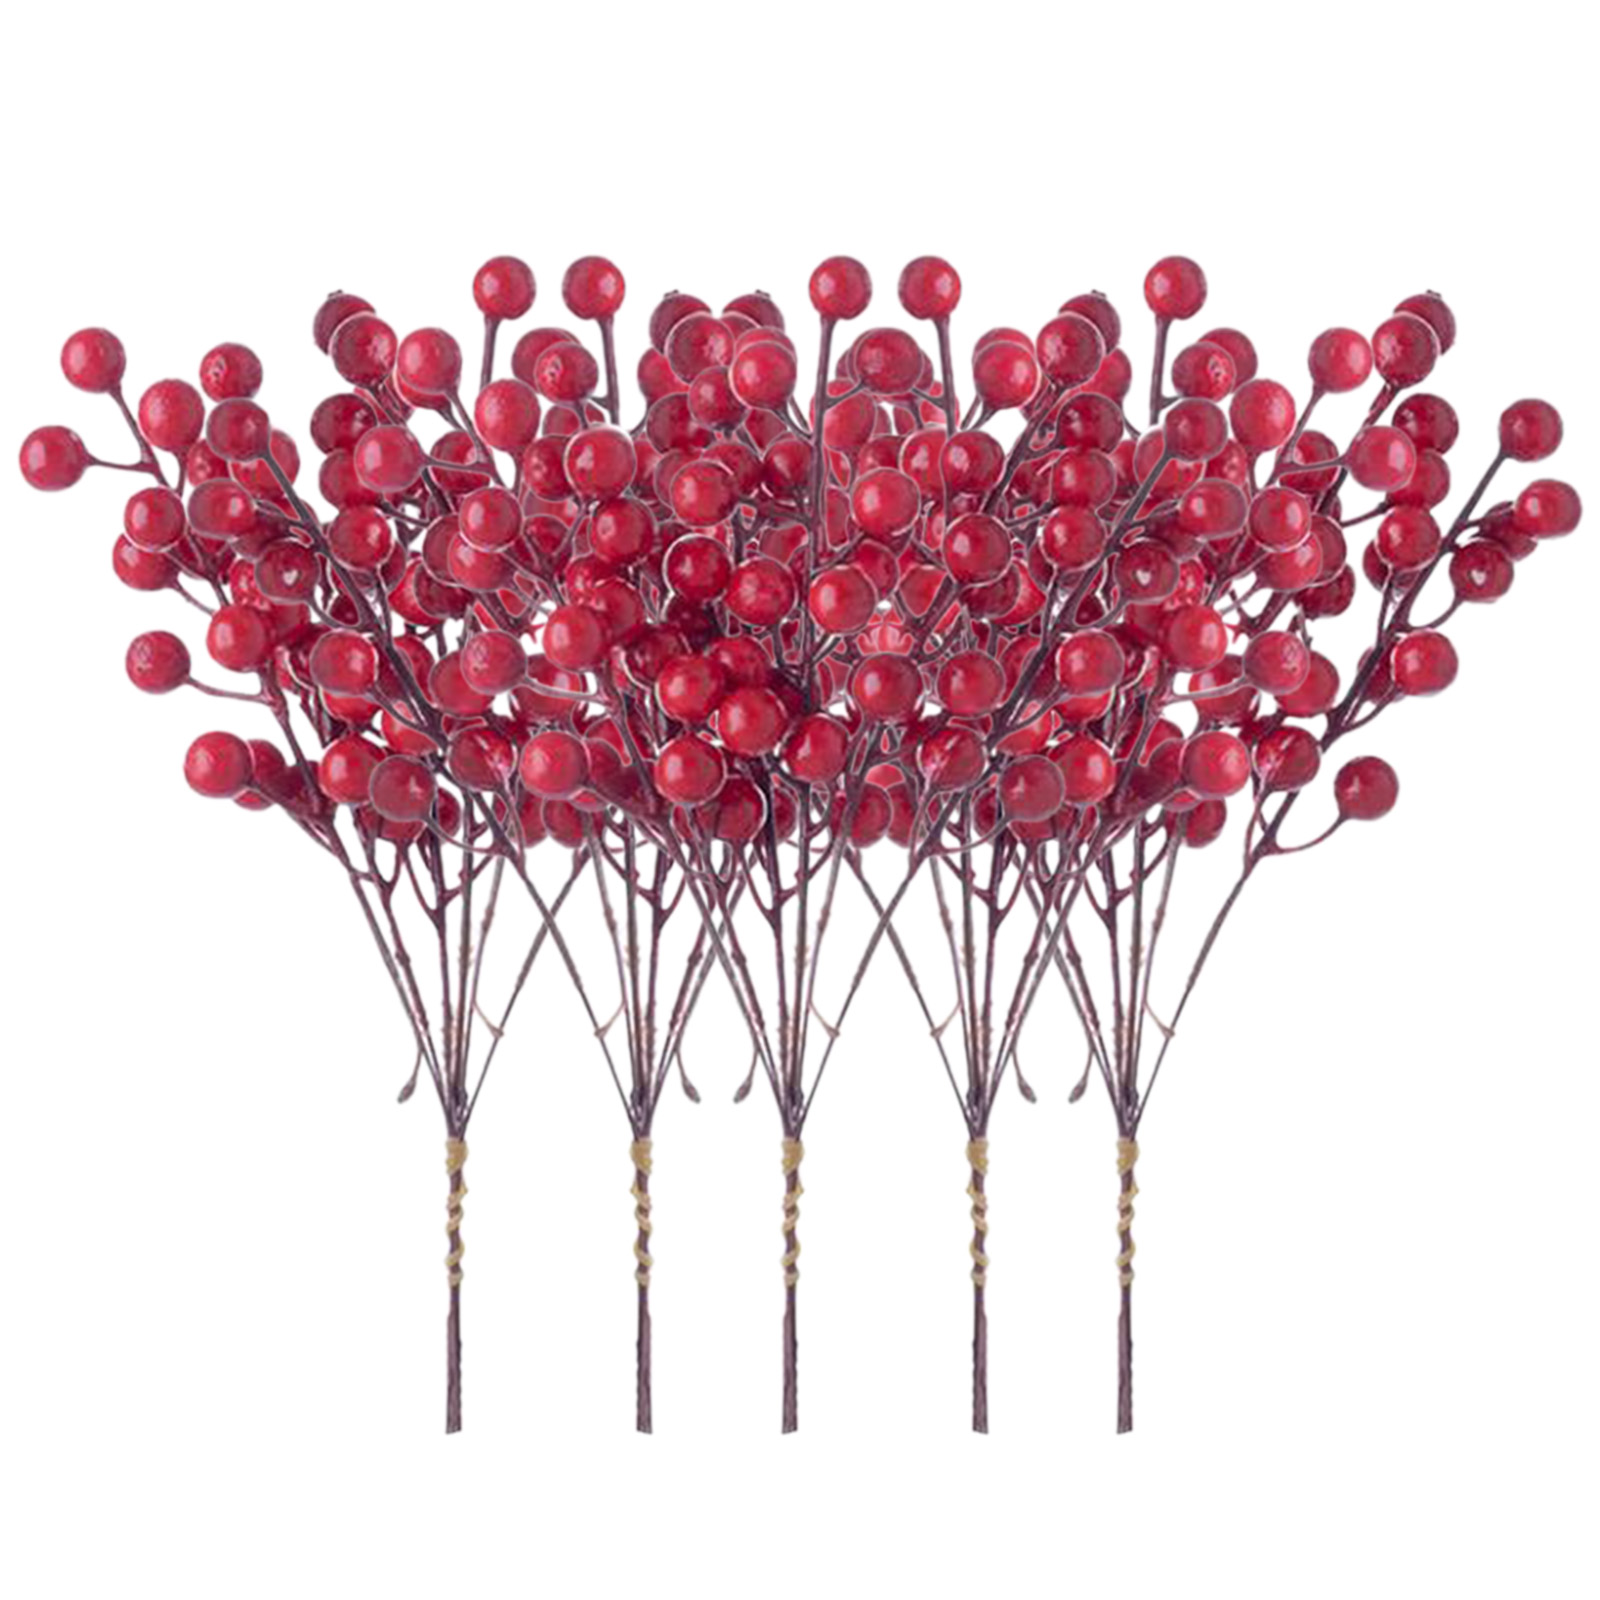 6 Heads 5pcs/Bunch Artificial Berries Branch Fake Plants Flowers Bouquet DIY Wreath Supplies Accessories For Christmas Party Home Decor